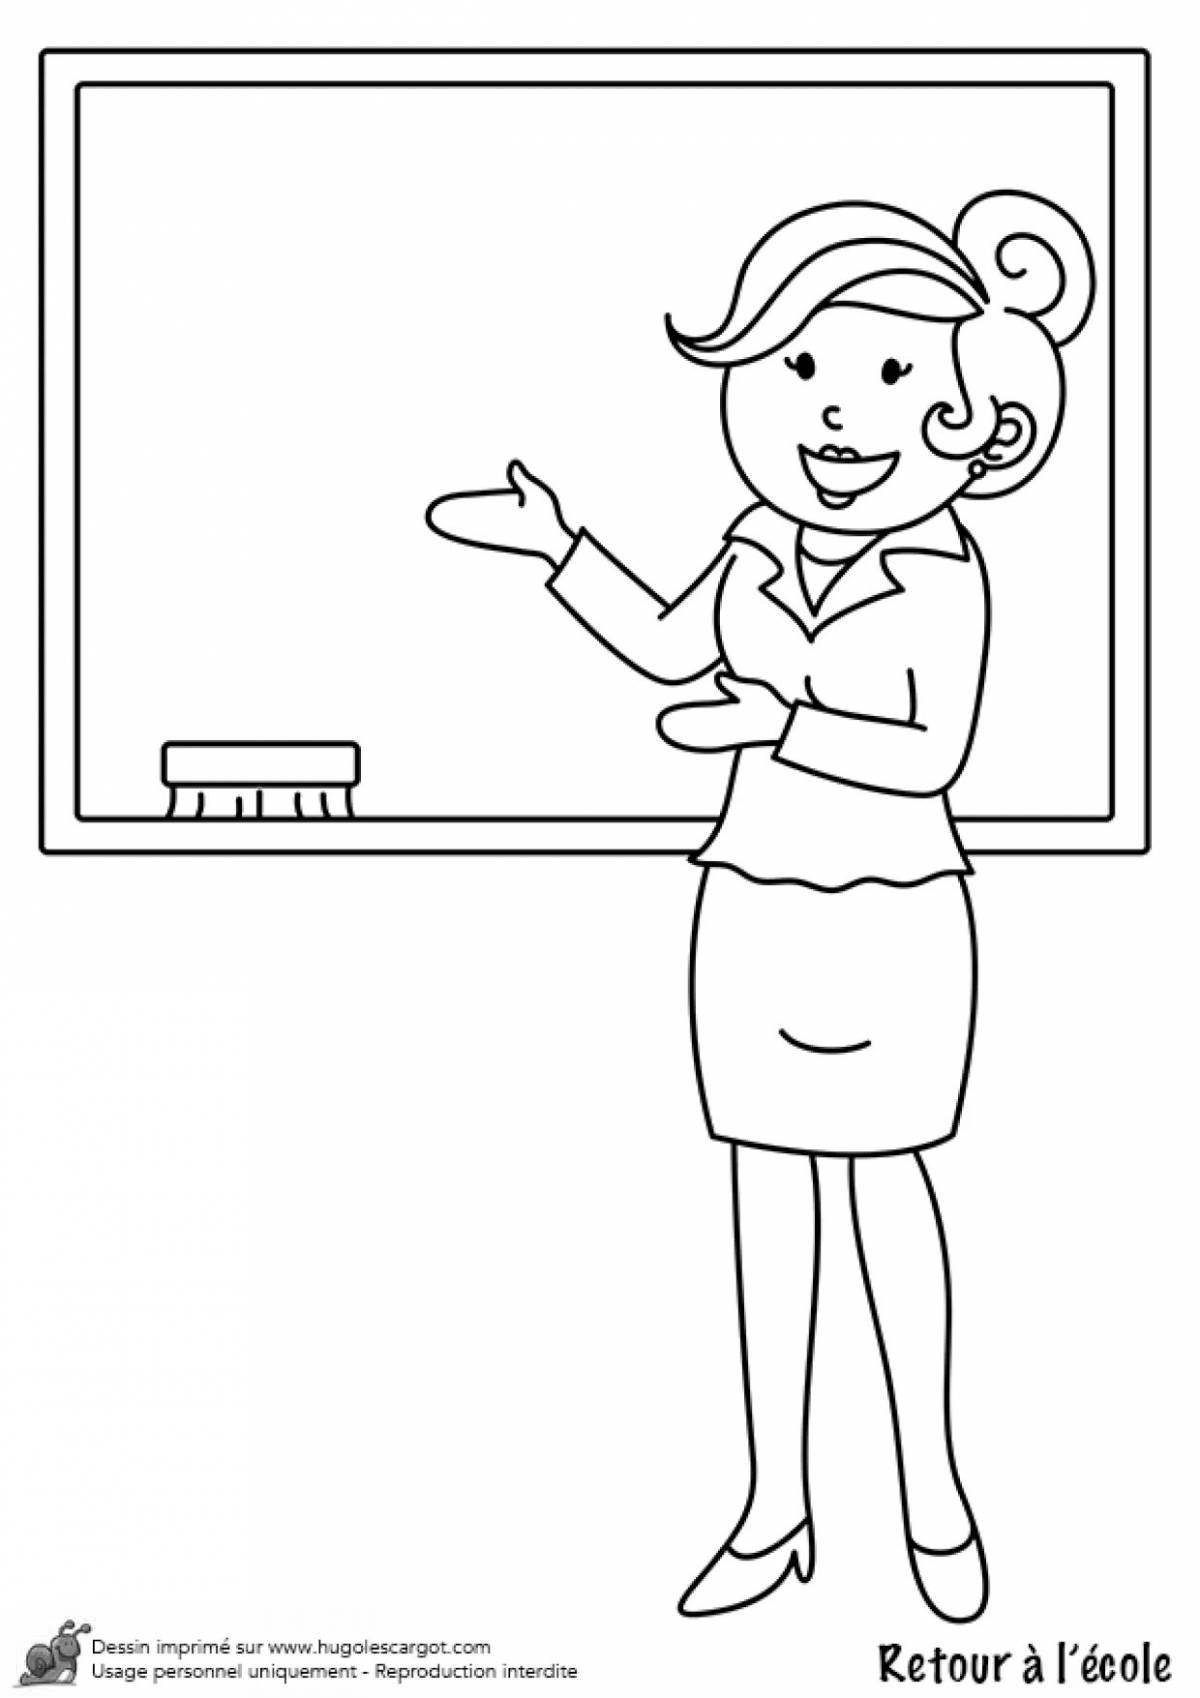 Coloring book wise teacher